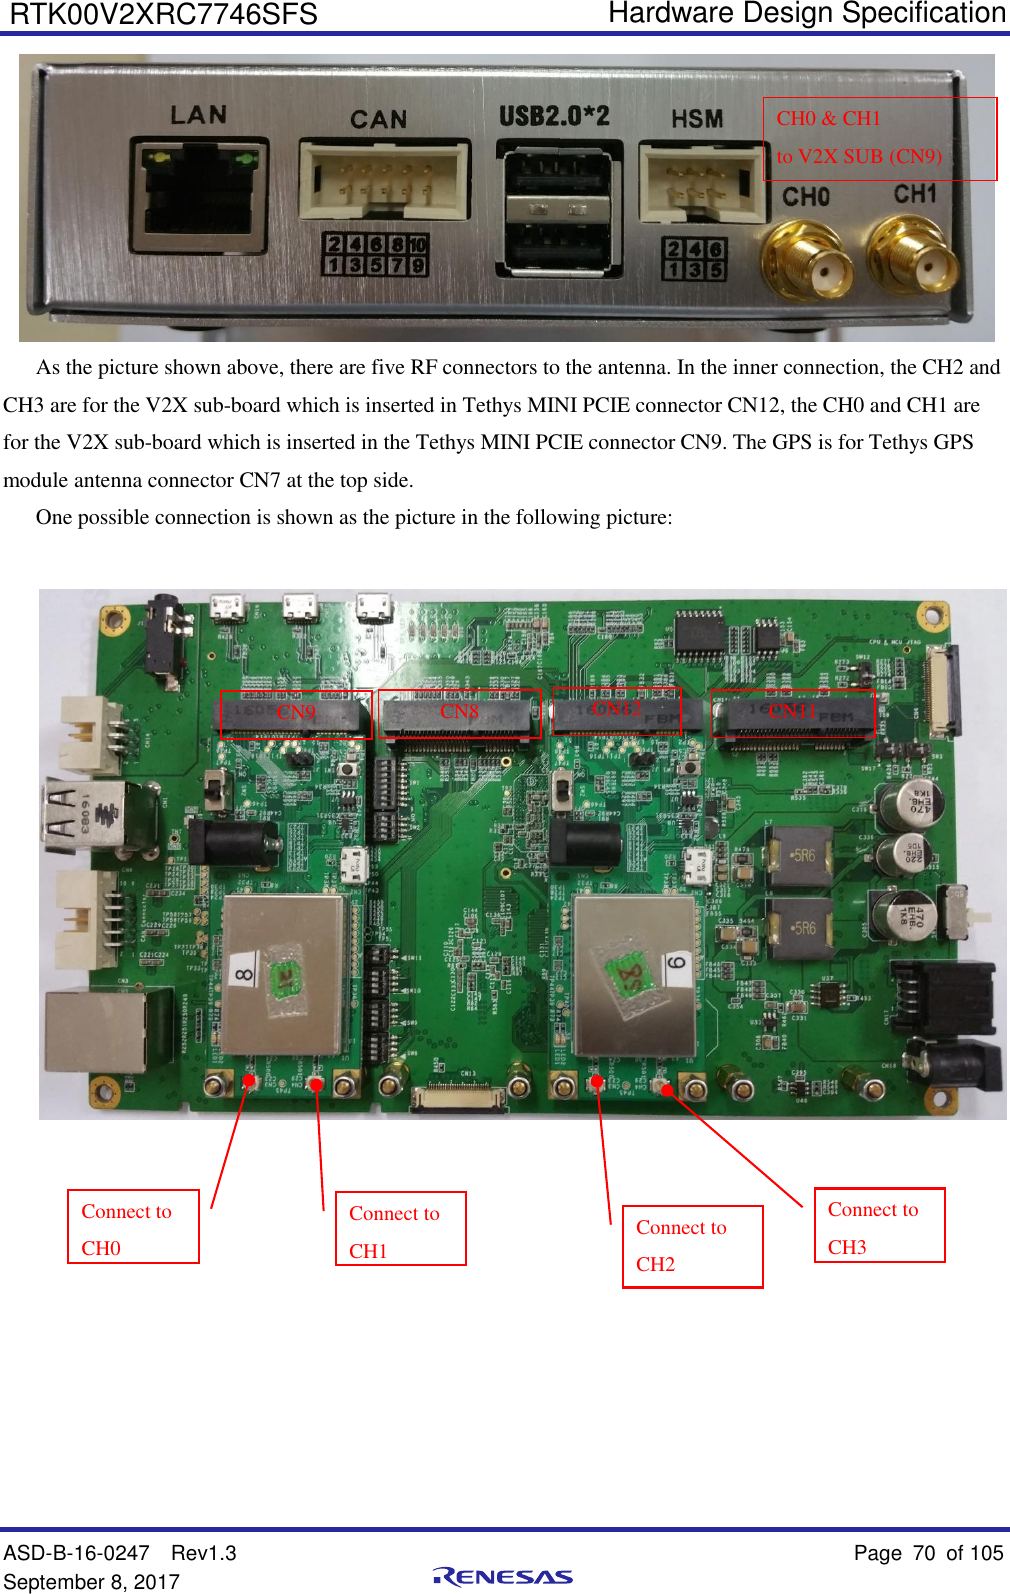   Hardware Design Specification ASD-B-16-0247  Rev1.3    Page 70  of 105 September 8, 2017      RTK00V2XRC7746SFS  As the picture shown above, there are five RF connectors to the antenna. In the inner connection, the CH2 and CH3 are for the V2X sub-board which is inserted in Tethys MINI PCIE connector CN12, the CH0 and CH1 are for the V2X sub-board which is inserted in the Tethys MINI PCIE connector CN9. The GPS is for Tethys GPS module antenna connector CN7 at the top side. One possible connection is shown as the picture in the following picture:           CH0 &amp; CH1                                 to V2X SUB (CN9)           CN12 CN8 CN9 Connect to CH0 Connect to CH1 Connect to CH2 Connect to CH3 CN11 